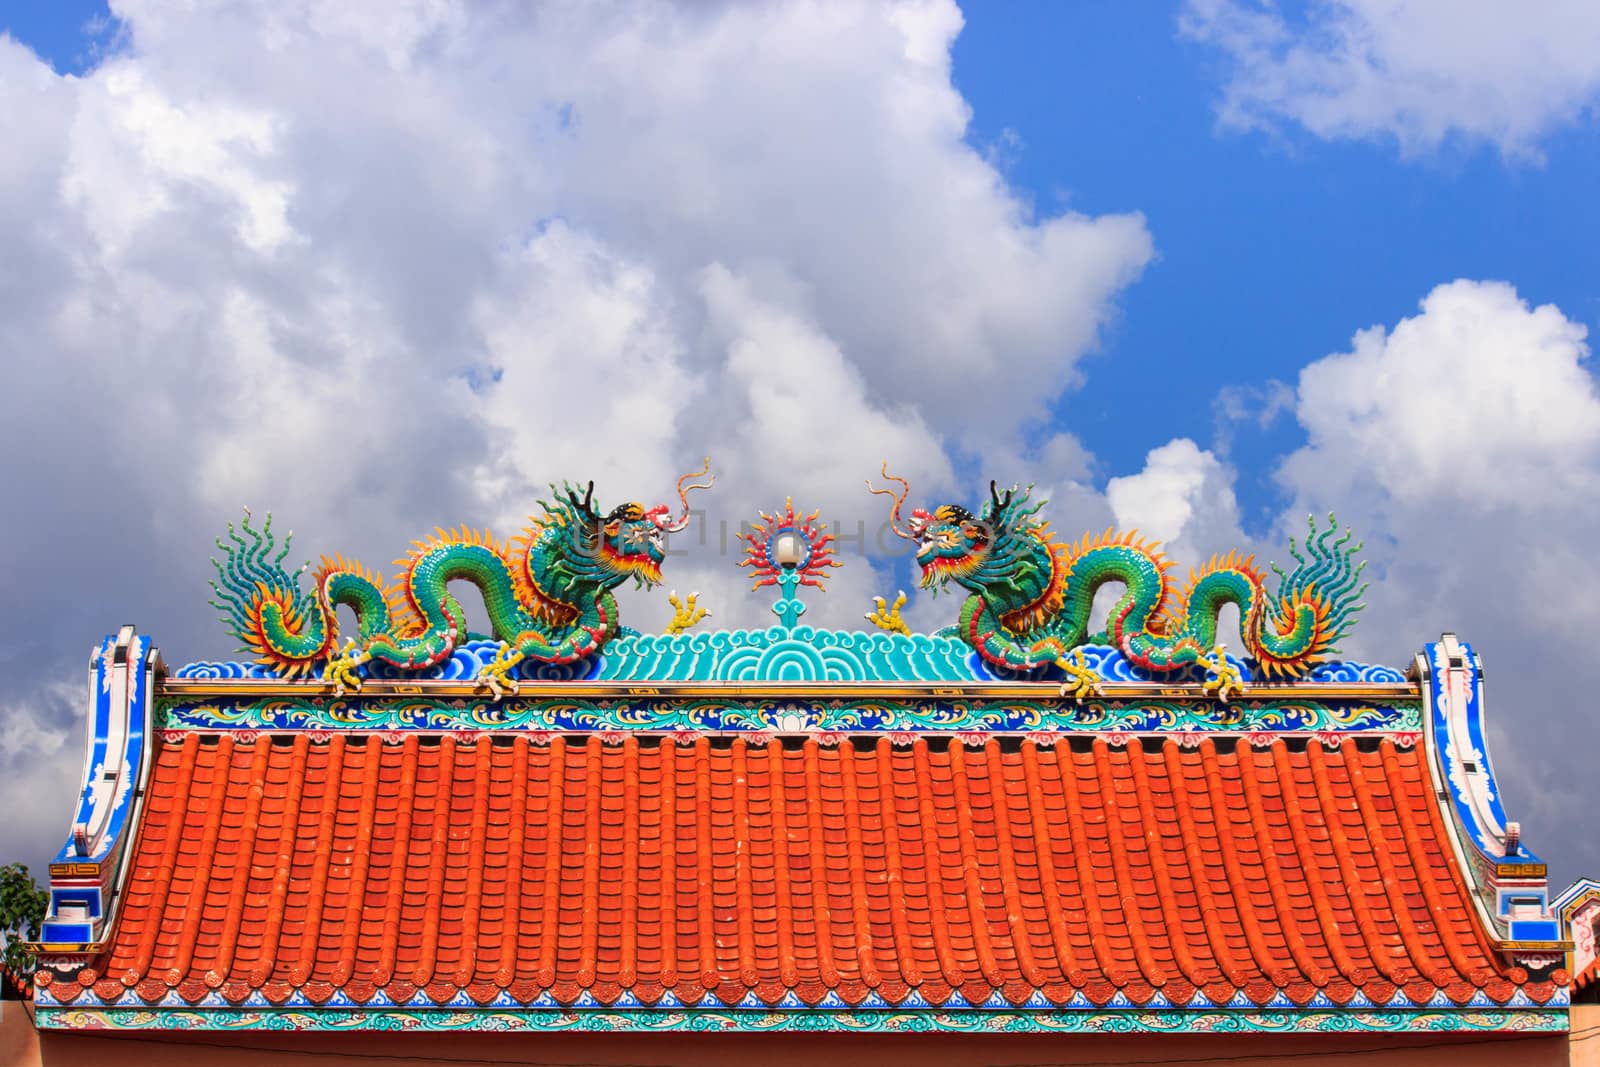 twin dragon on the top and blue sky